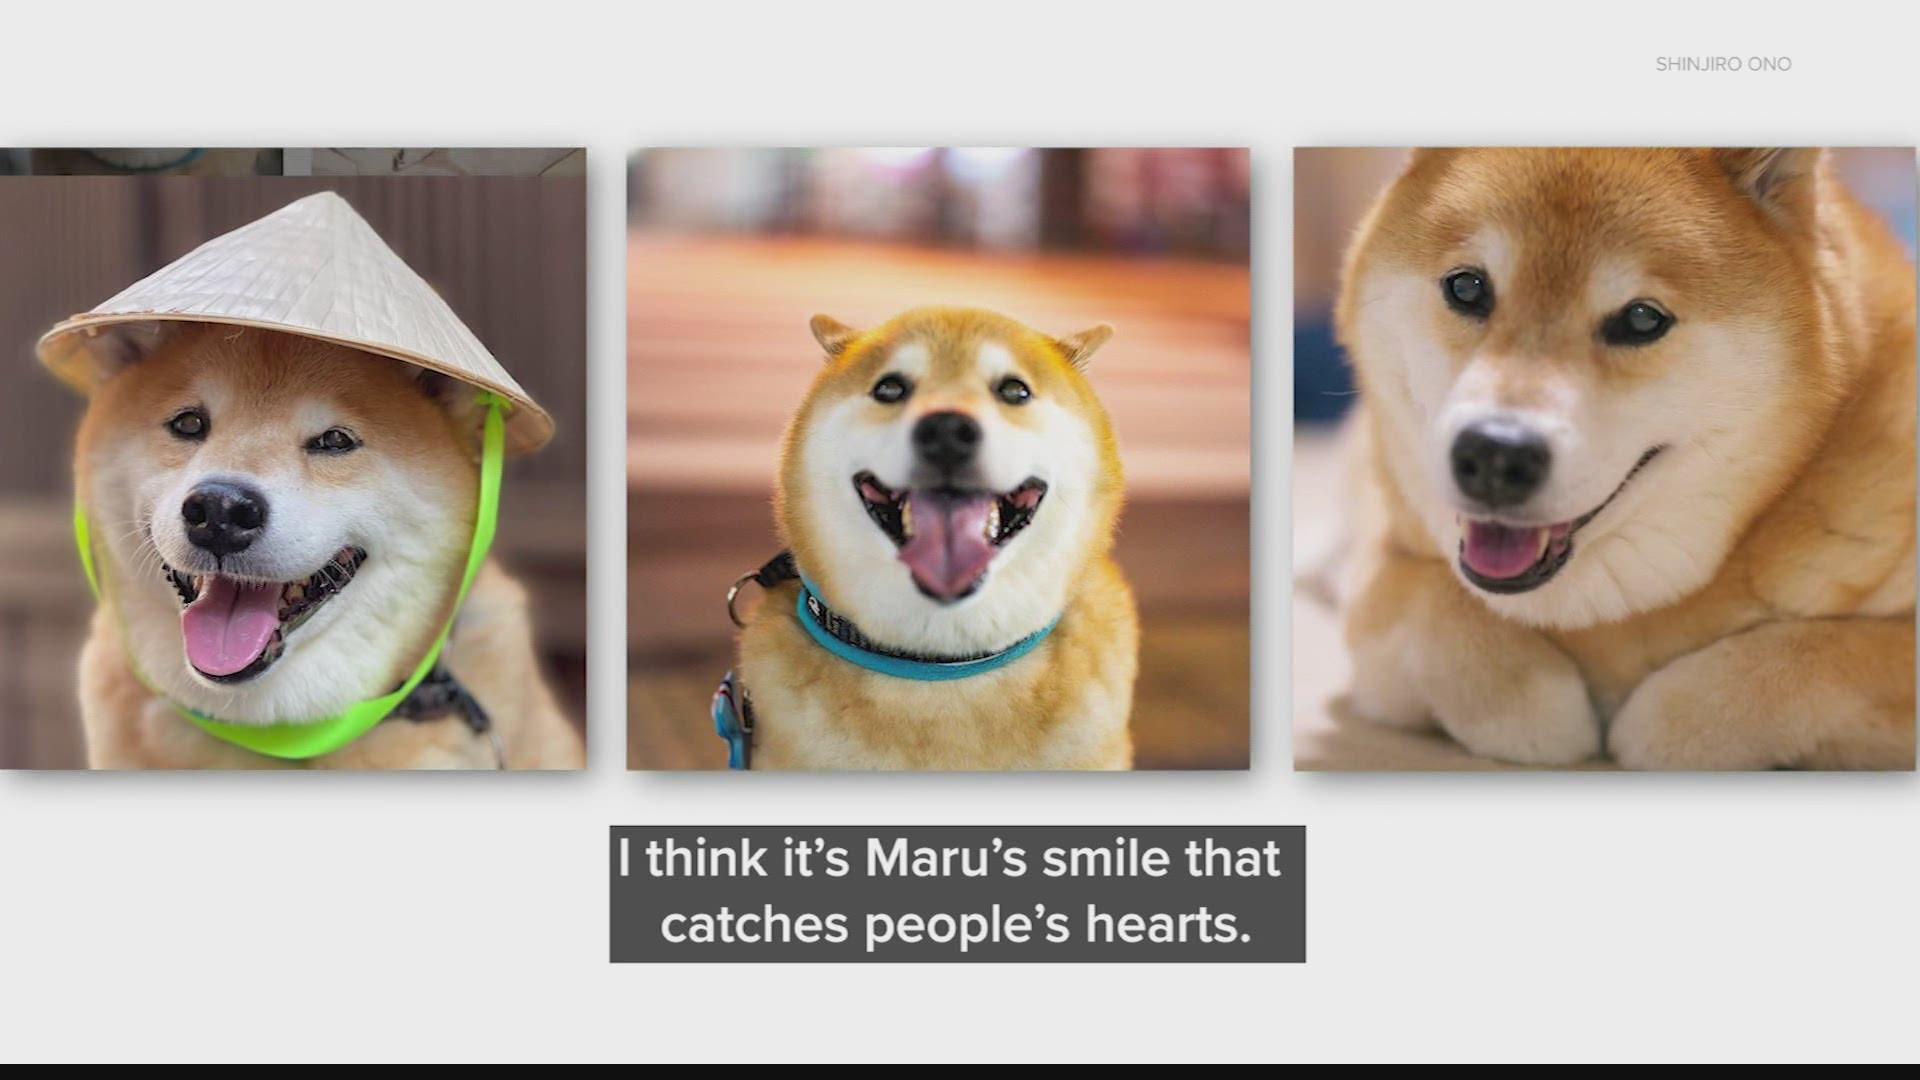 With 2.5 million followers on social media, Maru is a revenue generator, but proceeds go to an animal rescue.